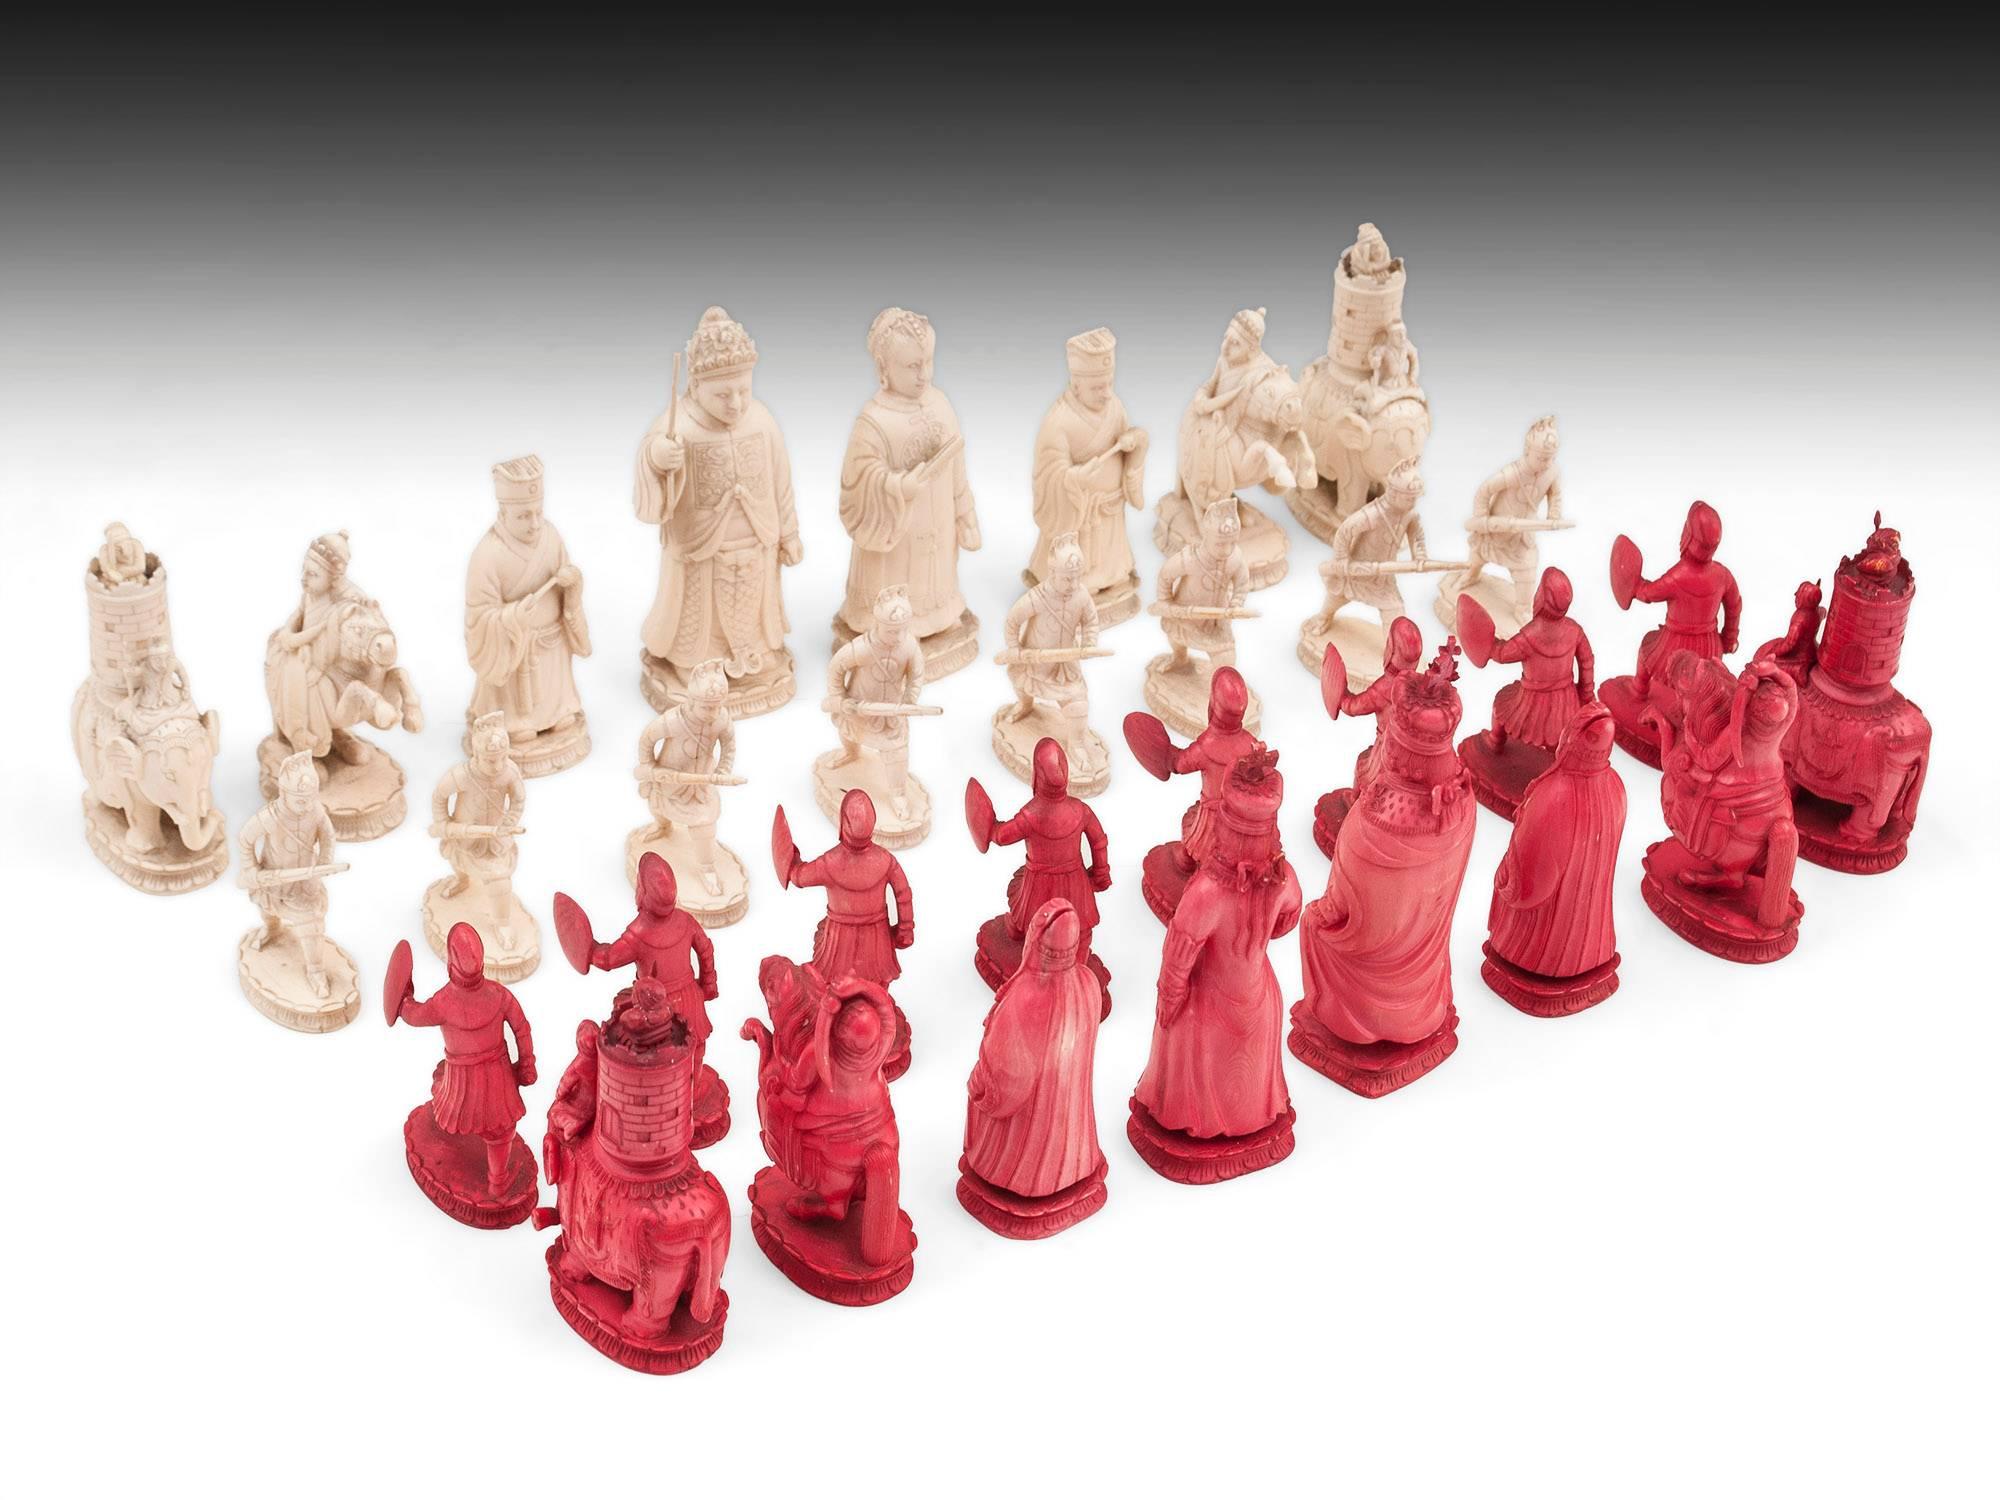 Georgian Asian chess set comprising of natural and red stained ivory pieces, beautifully carved with an exquisite attention to detail. 
The red stained pieces are King George III and Queen Charlotte, and the natural pieces King and Queen are an